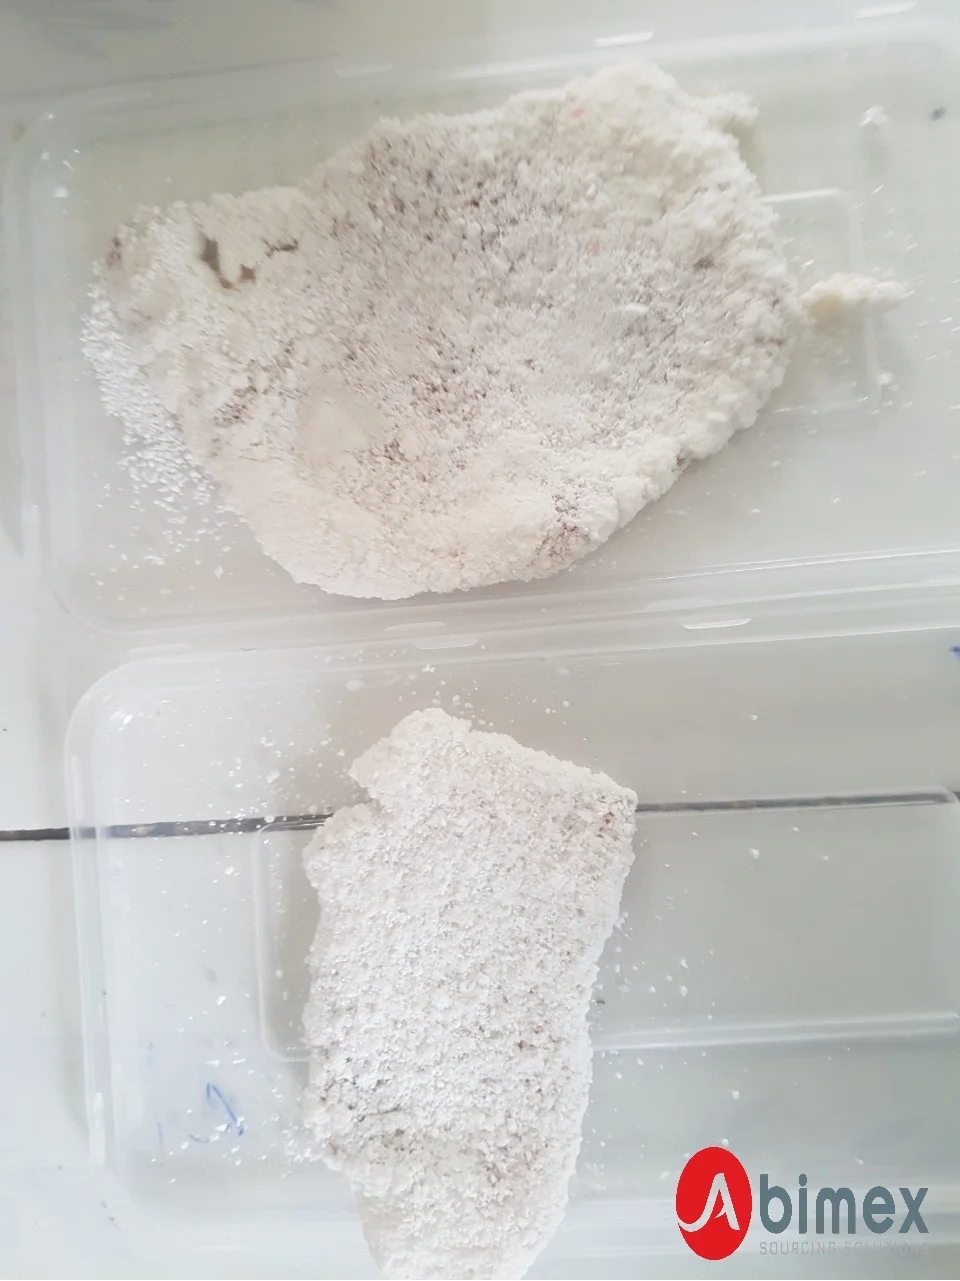 
GRANULATED STARCH FOR FRIED CHICKEN AND SEAFOOD BY TAPIOCA 